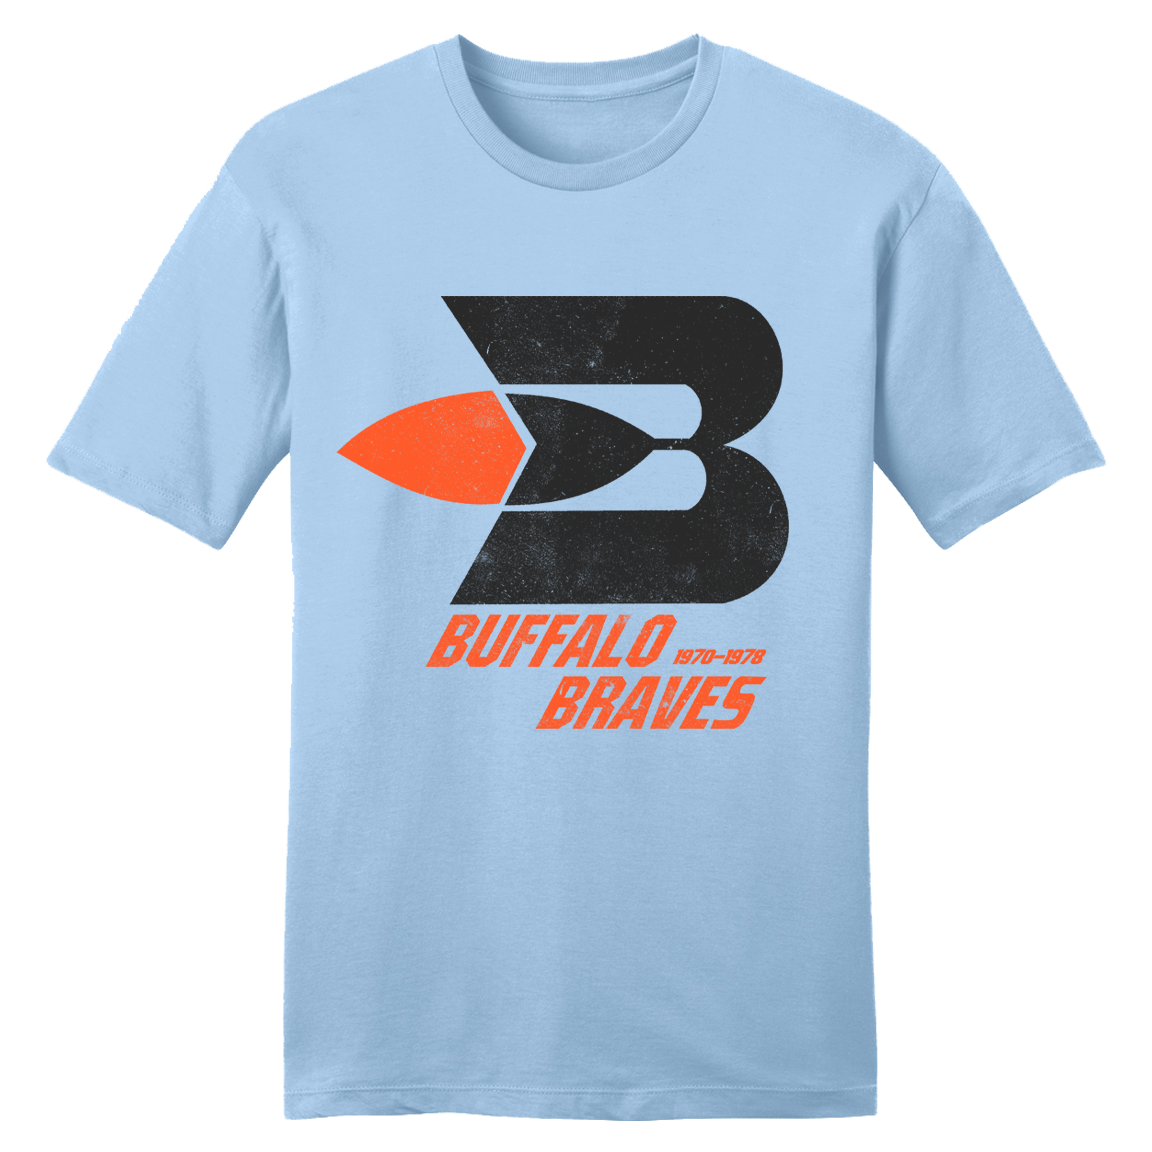 theScore on X: The Clippers are bringing back the Buffalo Braves